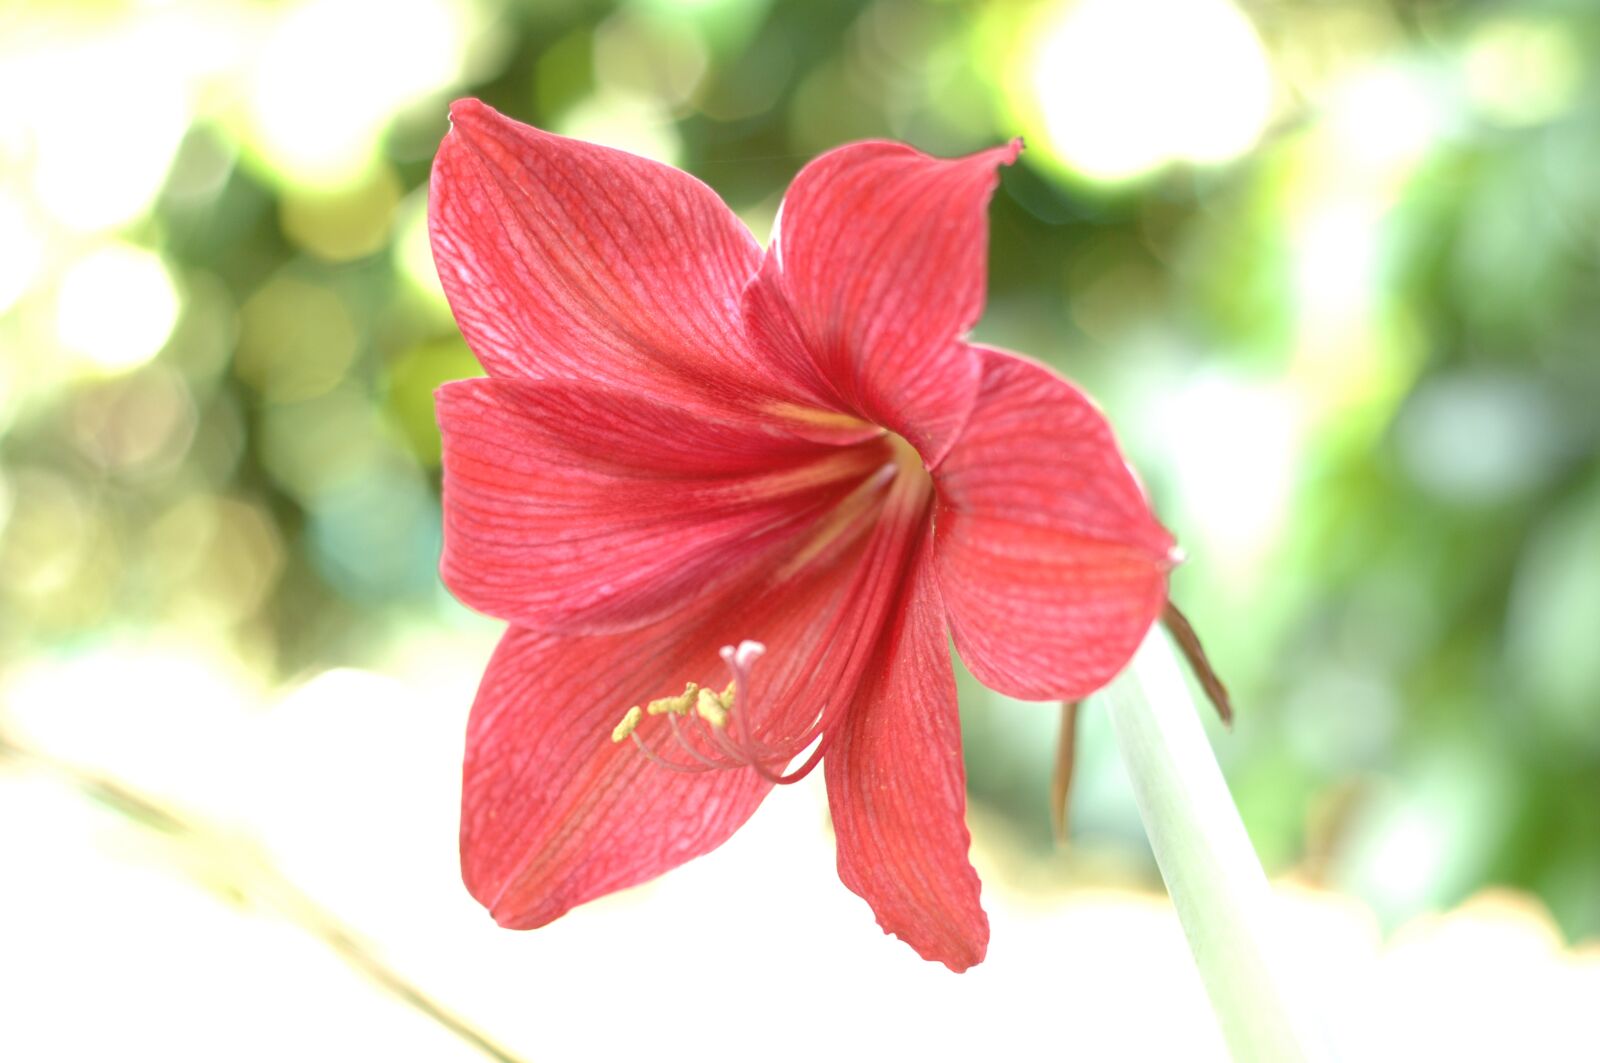 Nikon D2Xs sample photo. Flower, red, blooming photography